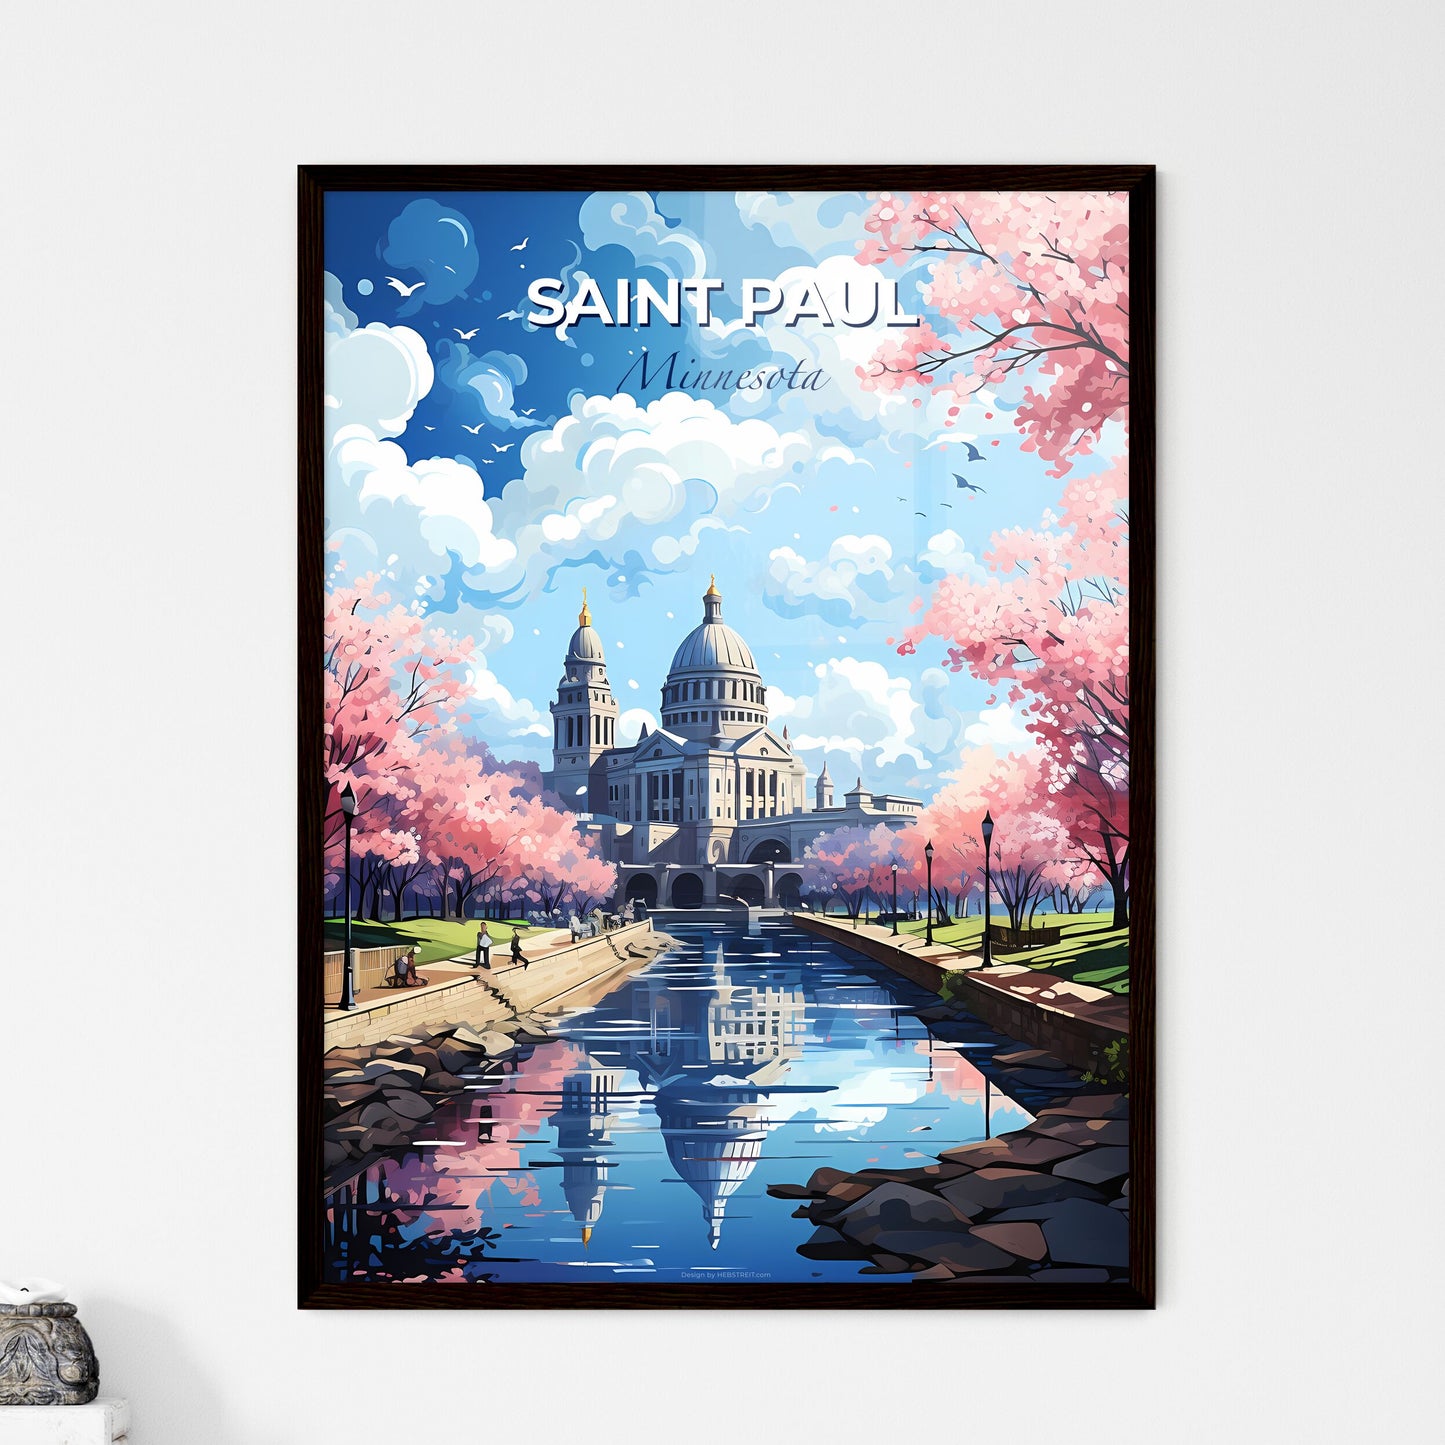 Saint Paul Minnesota Skyline - A Water Canal With A Building And Trees - Customizable Travel Gift Default Title